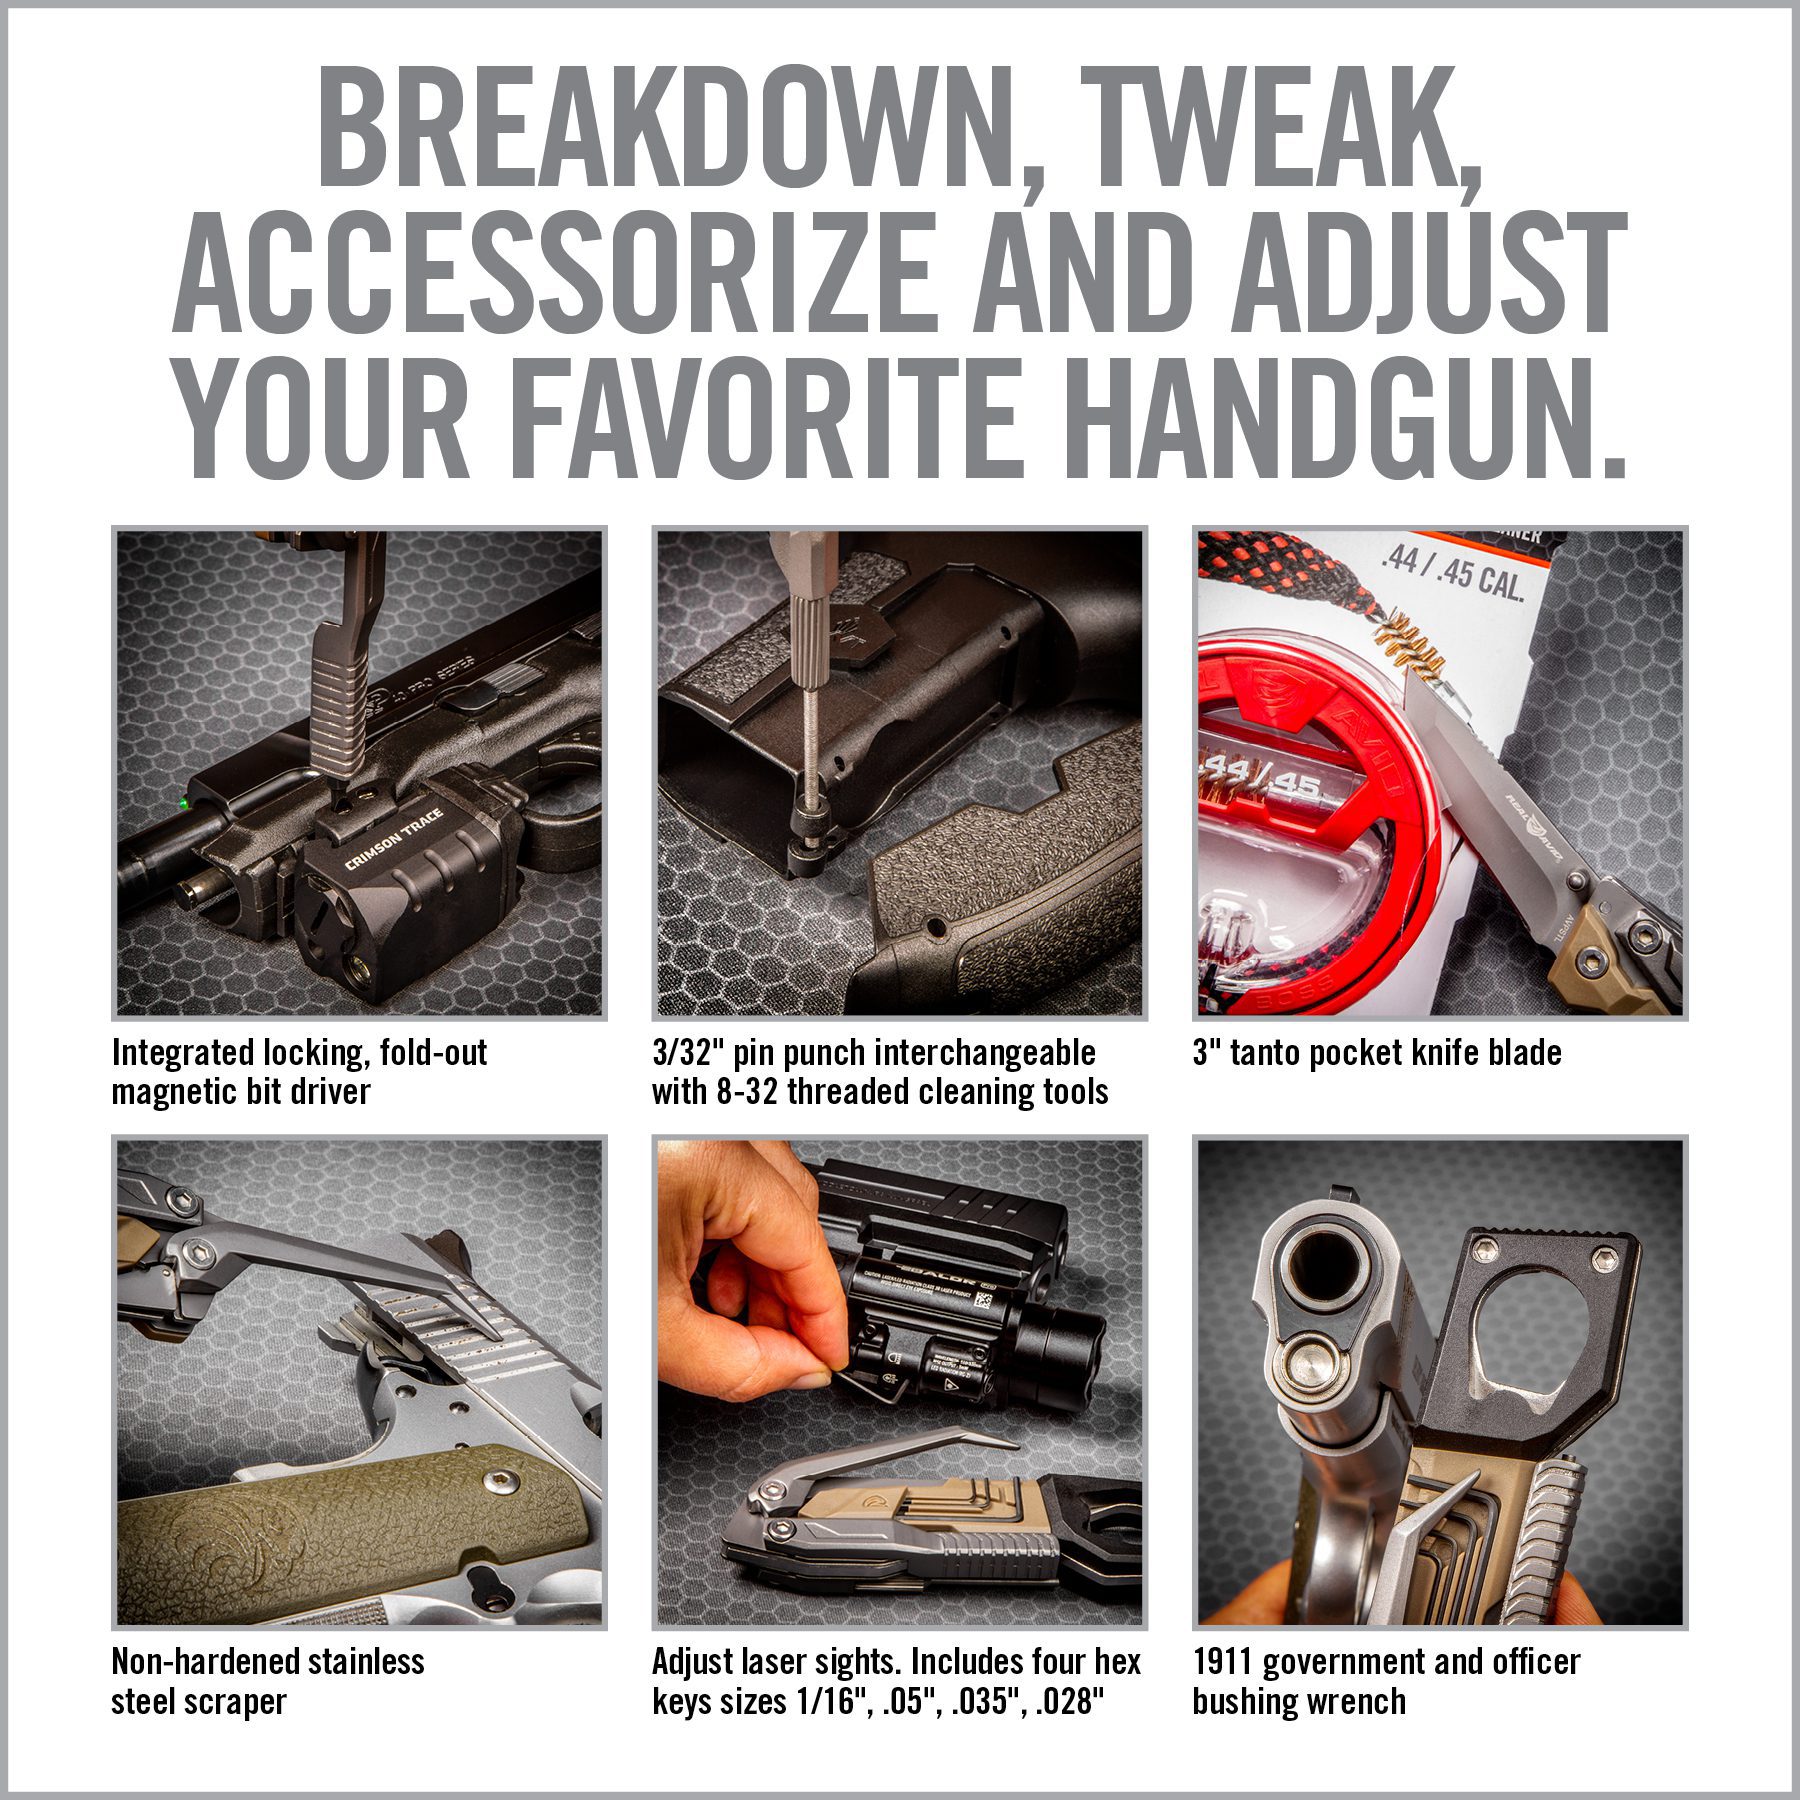 an advertisement for a gun store with instructions on how to use it